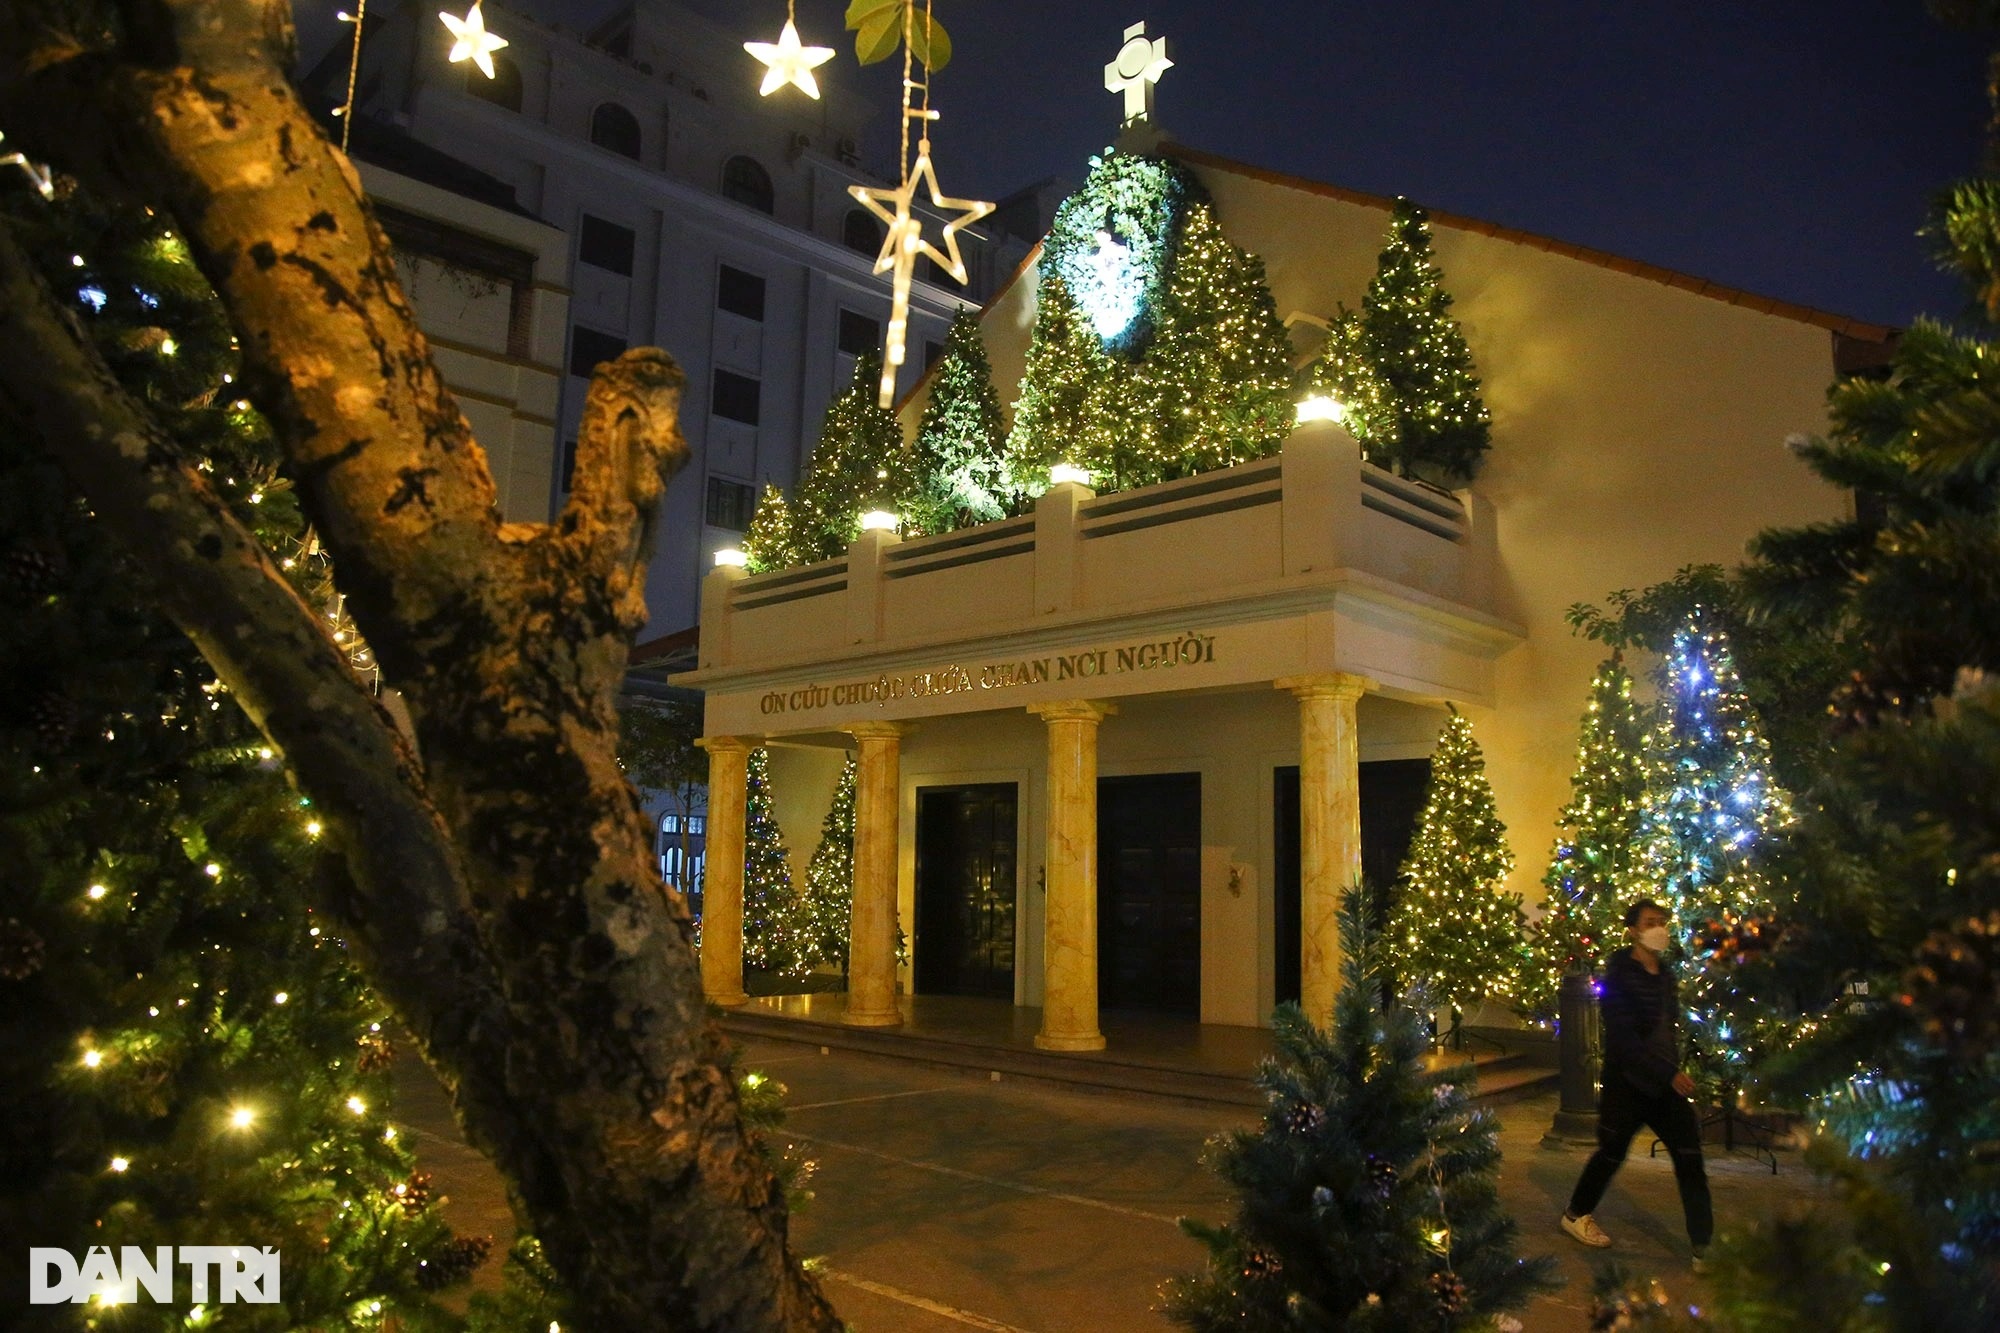 Churches in Hanoi are sparkling to welcome Christmas 2021 - 13